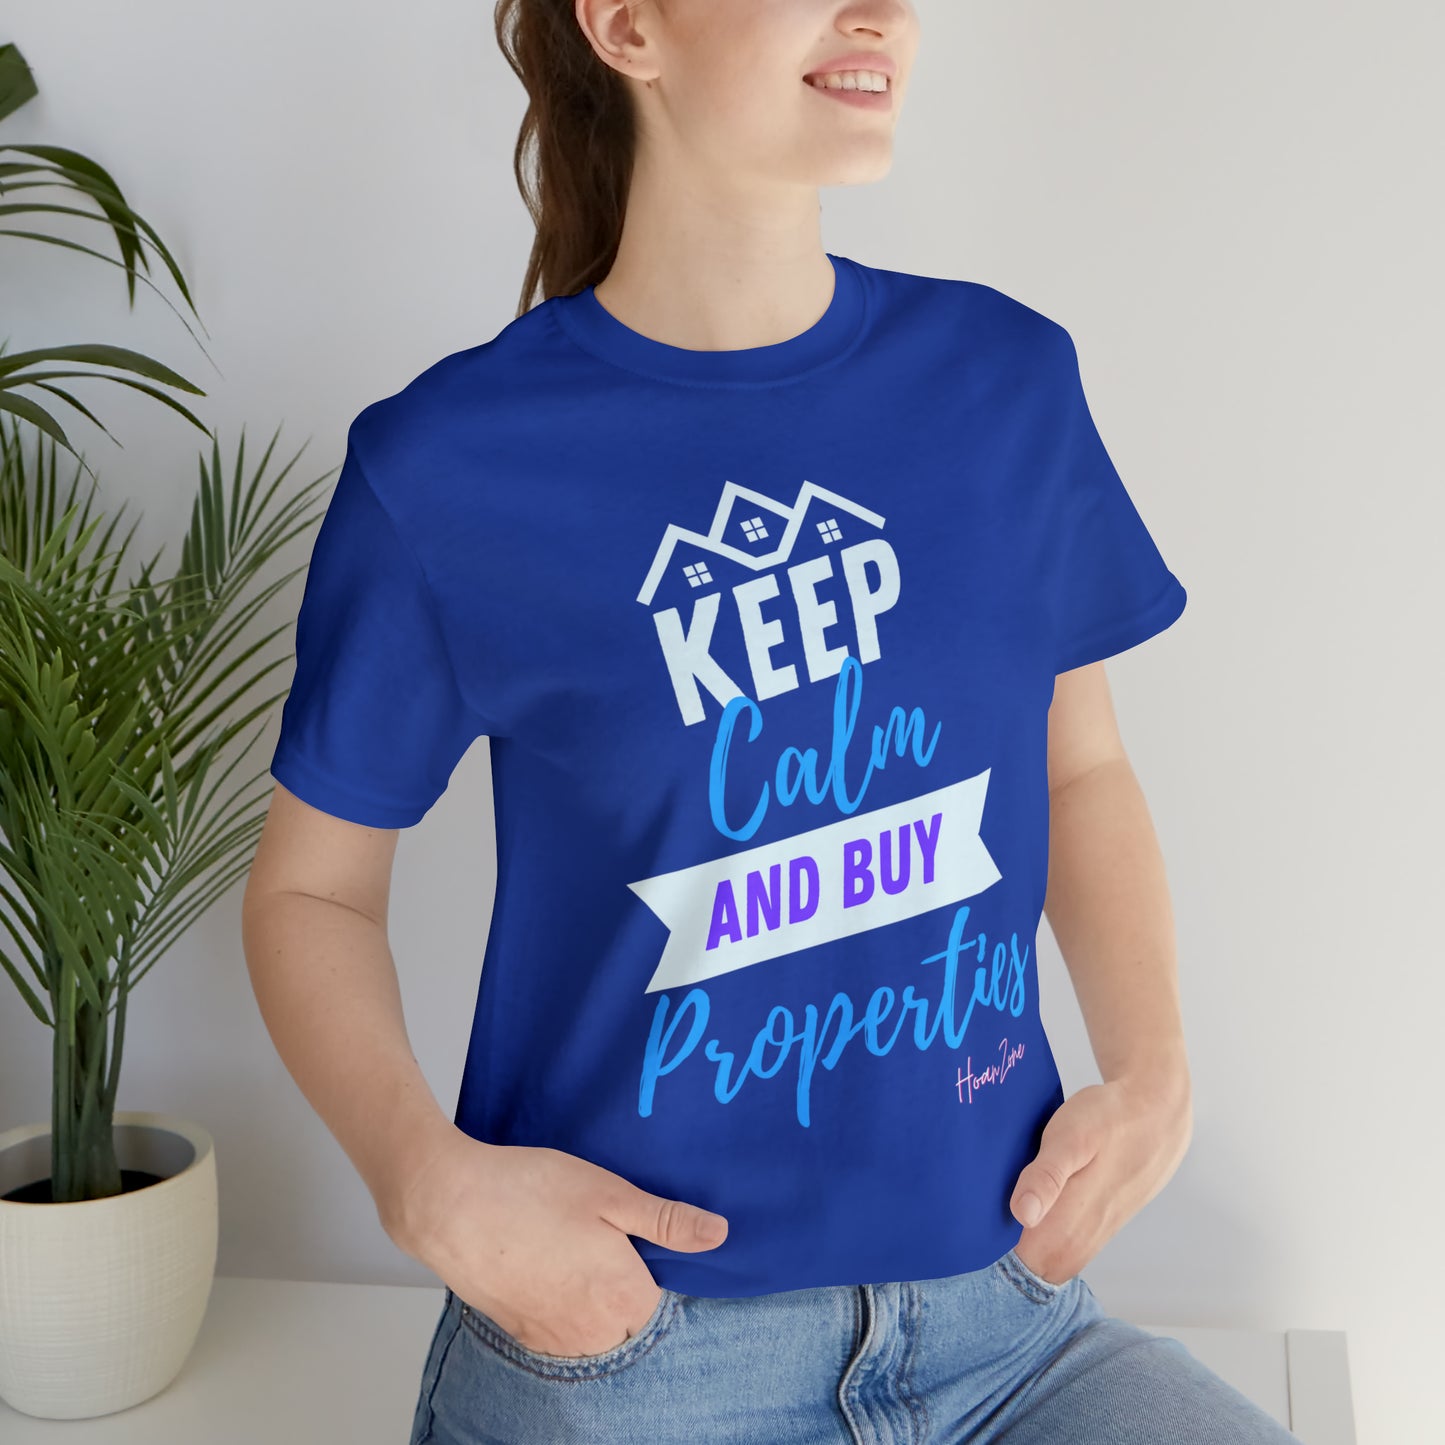 Keep Calm and Buy Properties